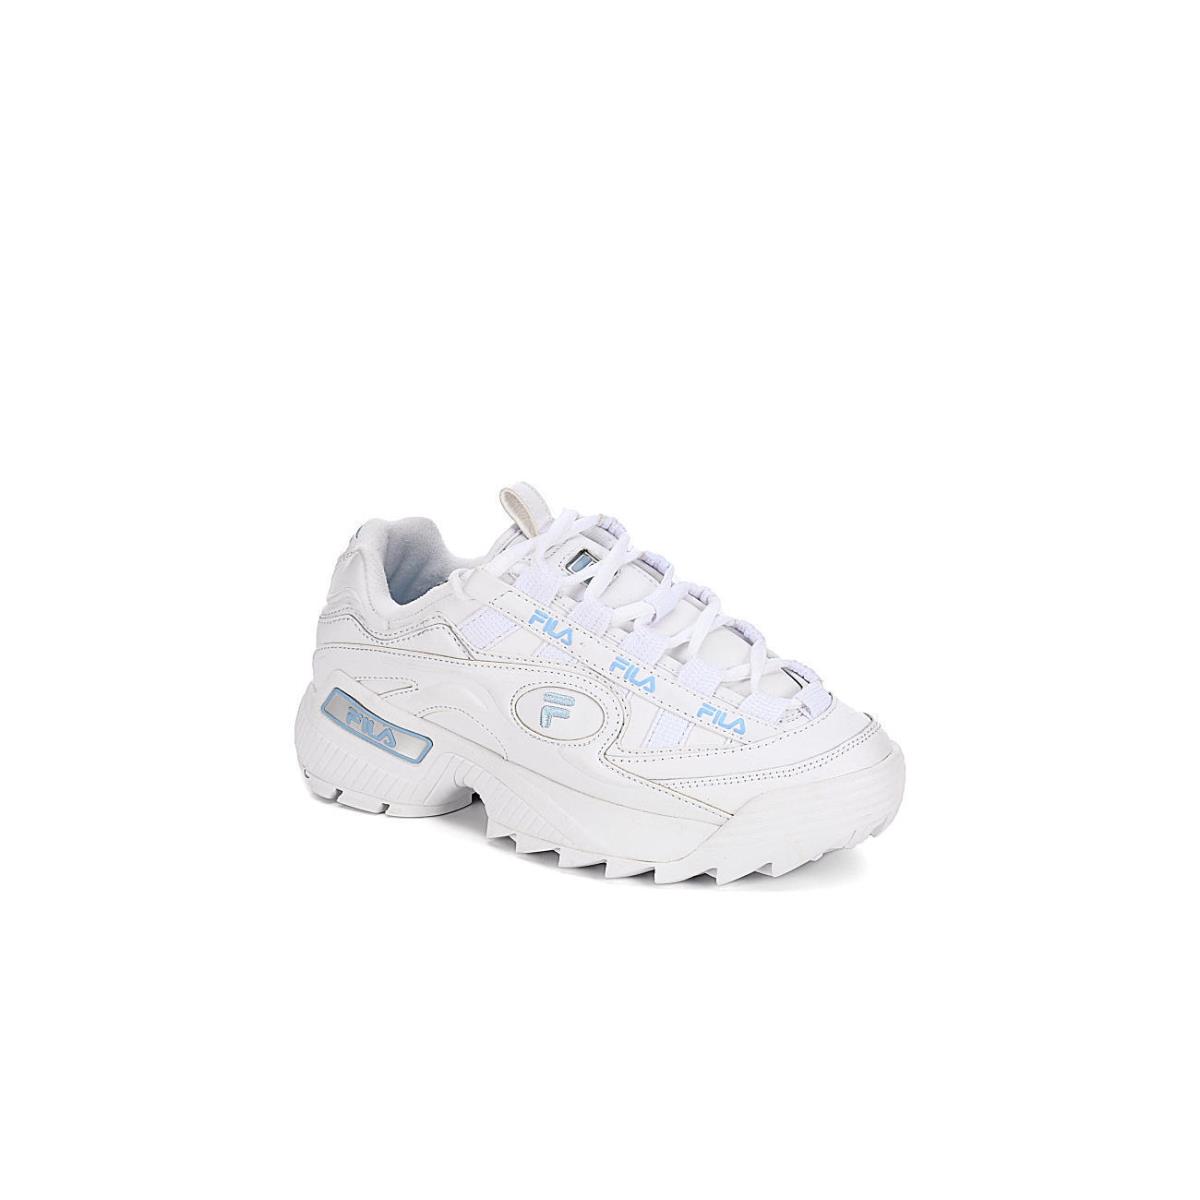 Womens Classic Fila Dformation Premium White Baby Blue Lace UP Sneakers